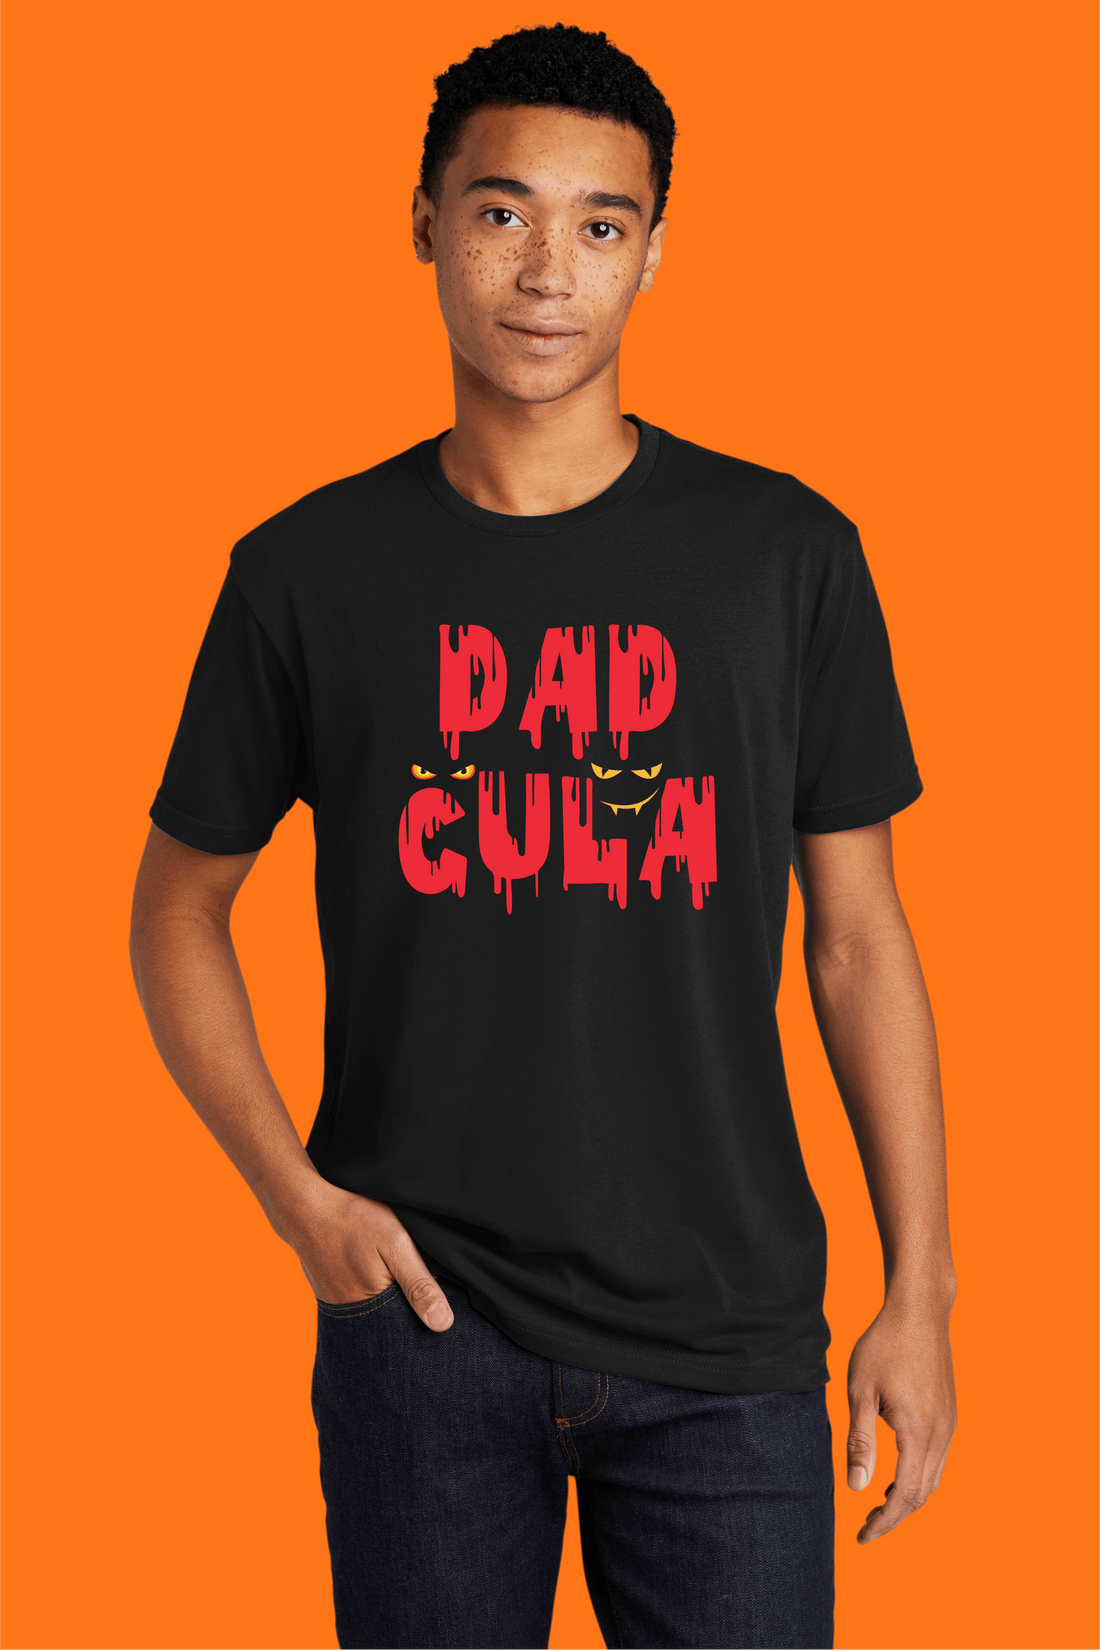 Sink your teeth into style this Halloween with our "Dadcula" tee!